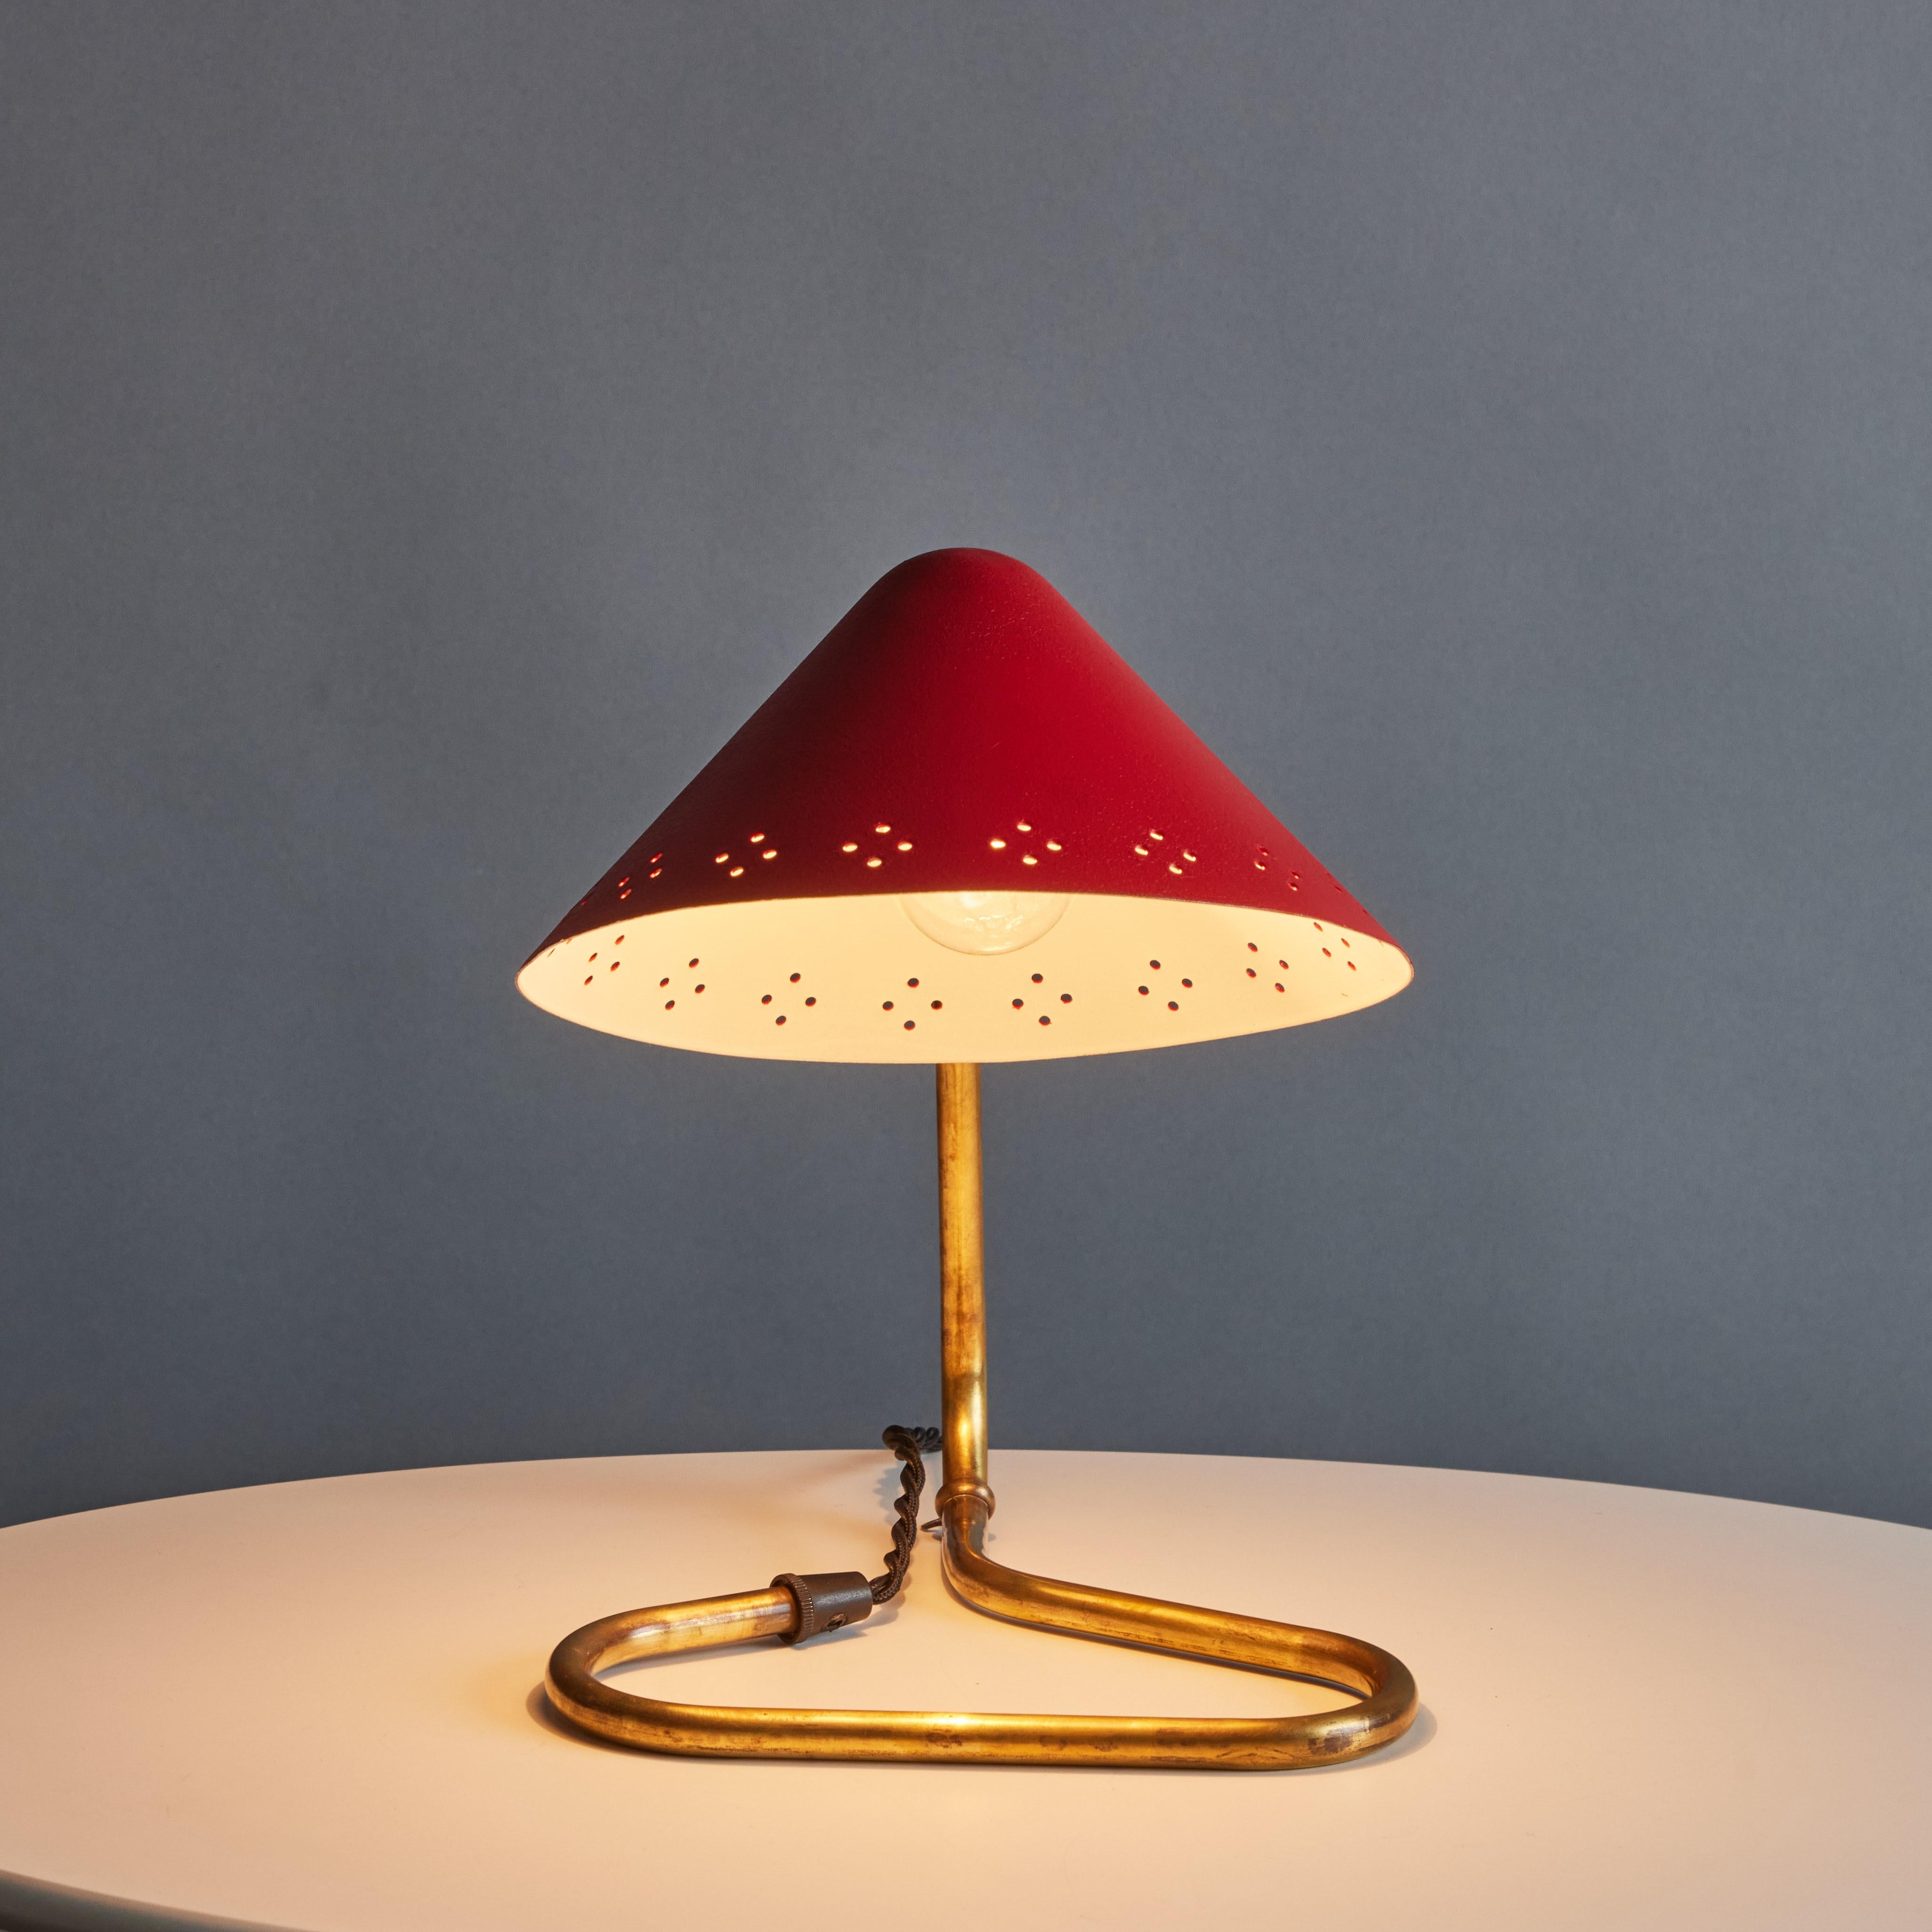 Pair of 1950s Erik Warna 'GK14' Red and Brass Perforated Shade Table Lamps. Executed in perforated red painted metal and patinated brass. Shade is adjustable and can be rotate up or down. Produced by Gnosjö Konstsmide Rydahls in Sweden in the